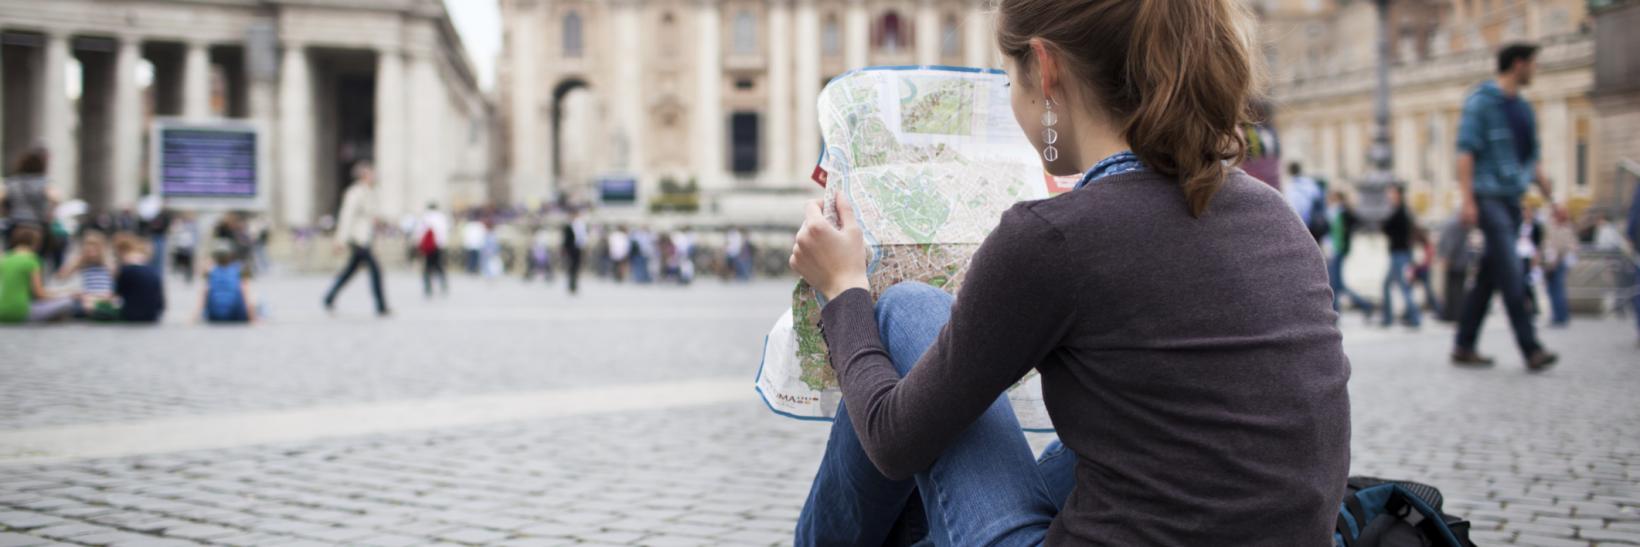 woman reads a map